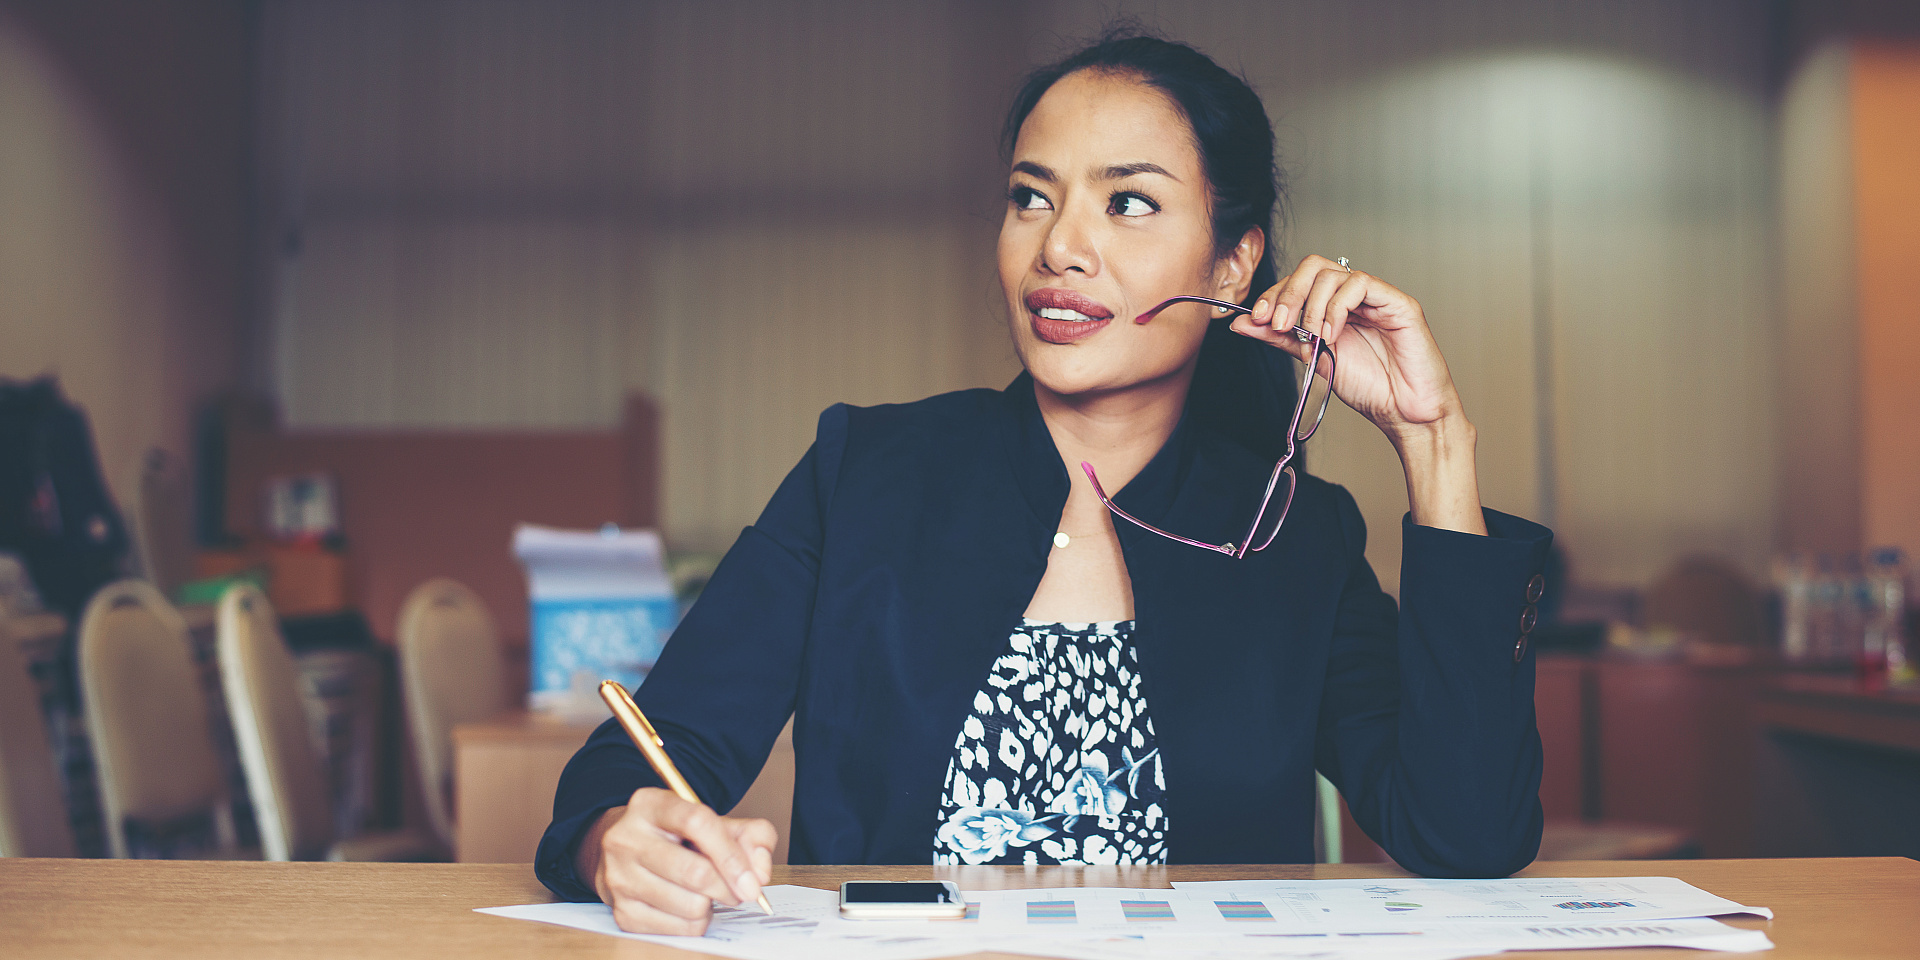 business woman working at office holding glasses